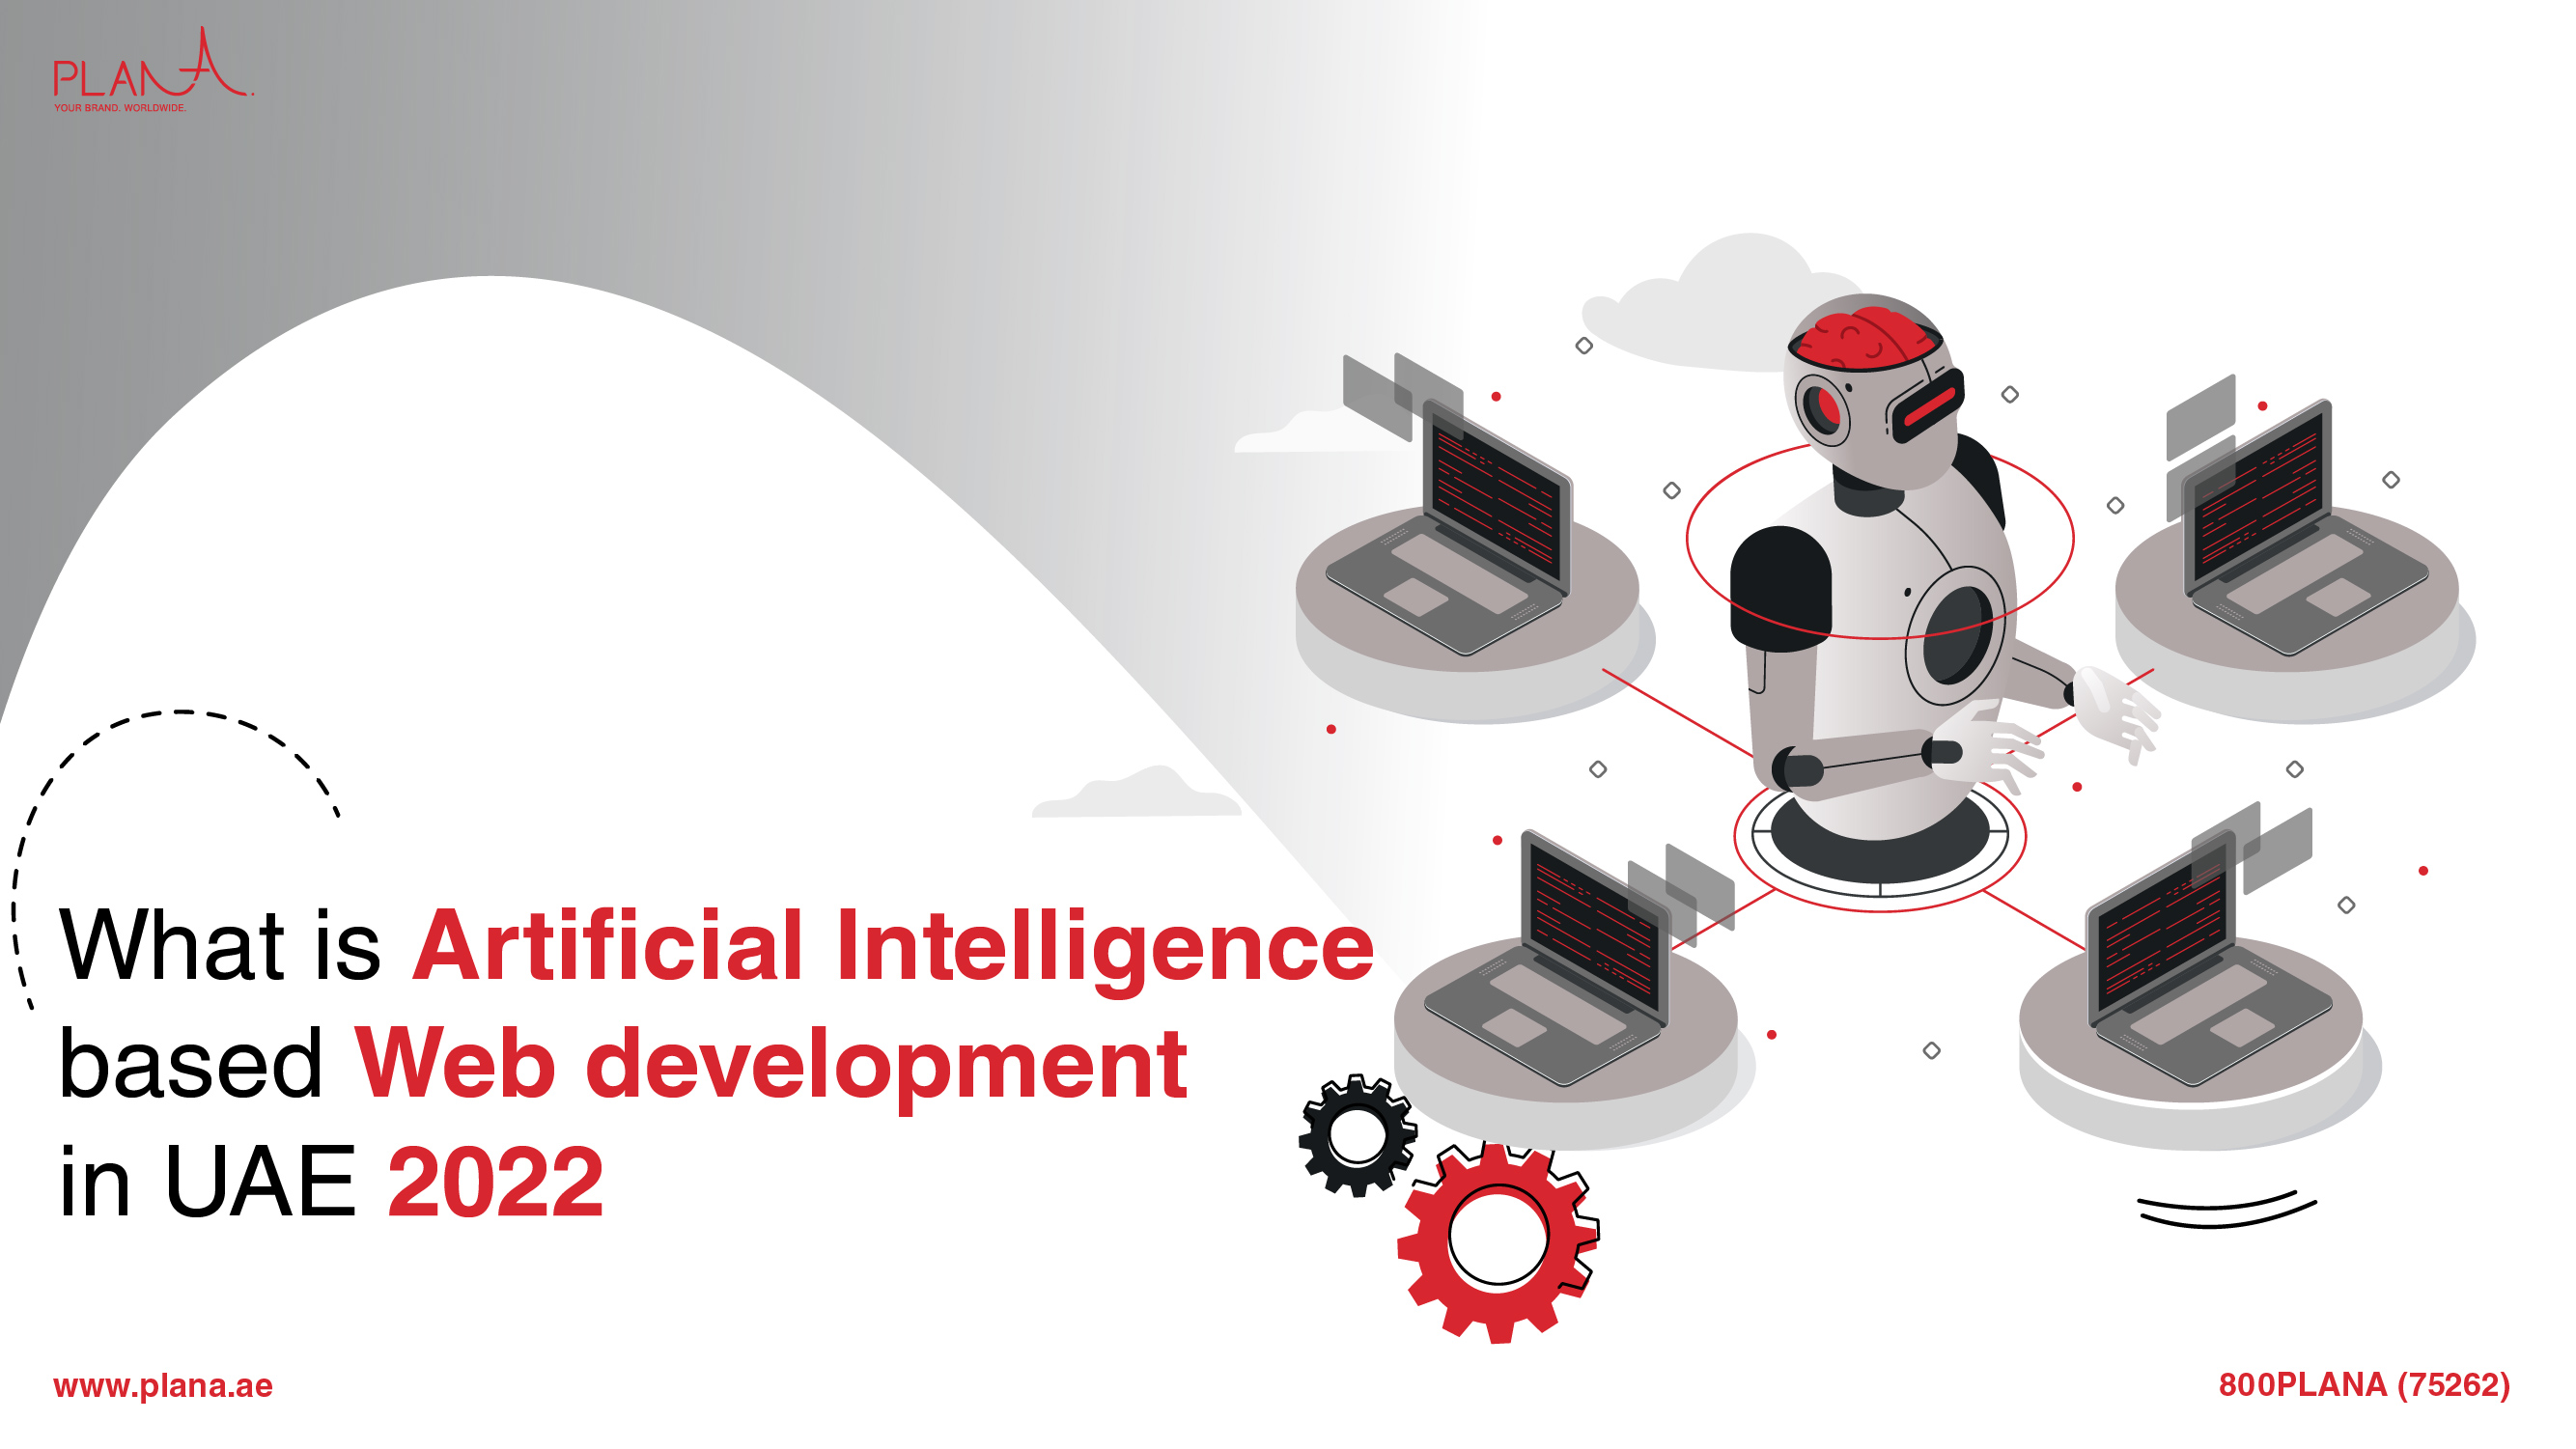 What is Artificial Intelligence based Web development in UAE 2022